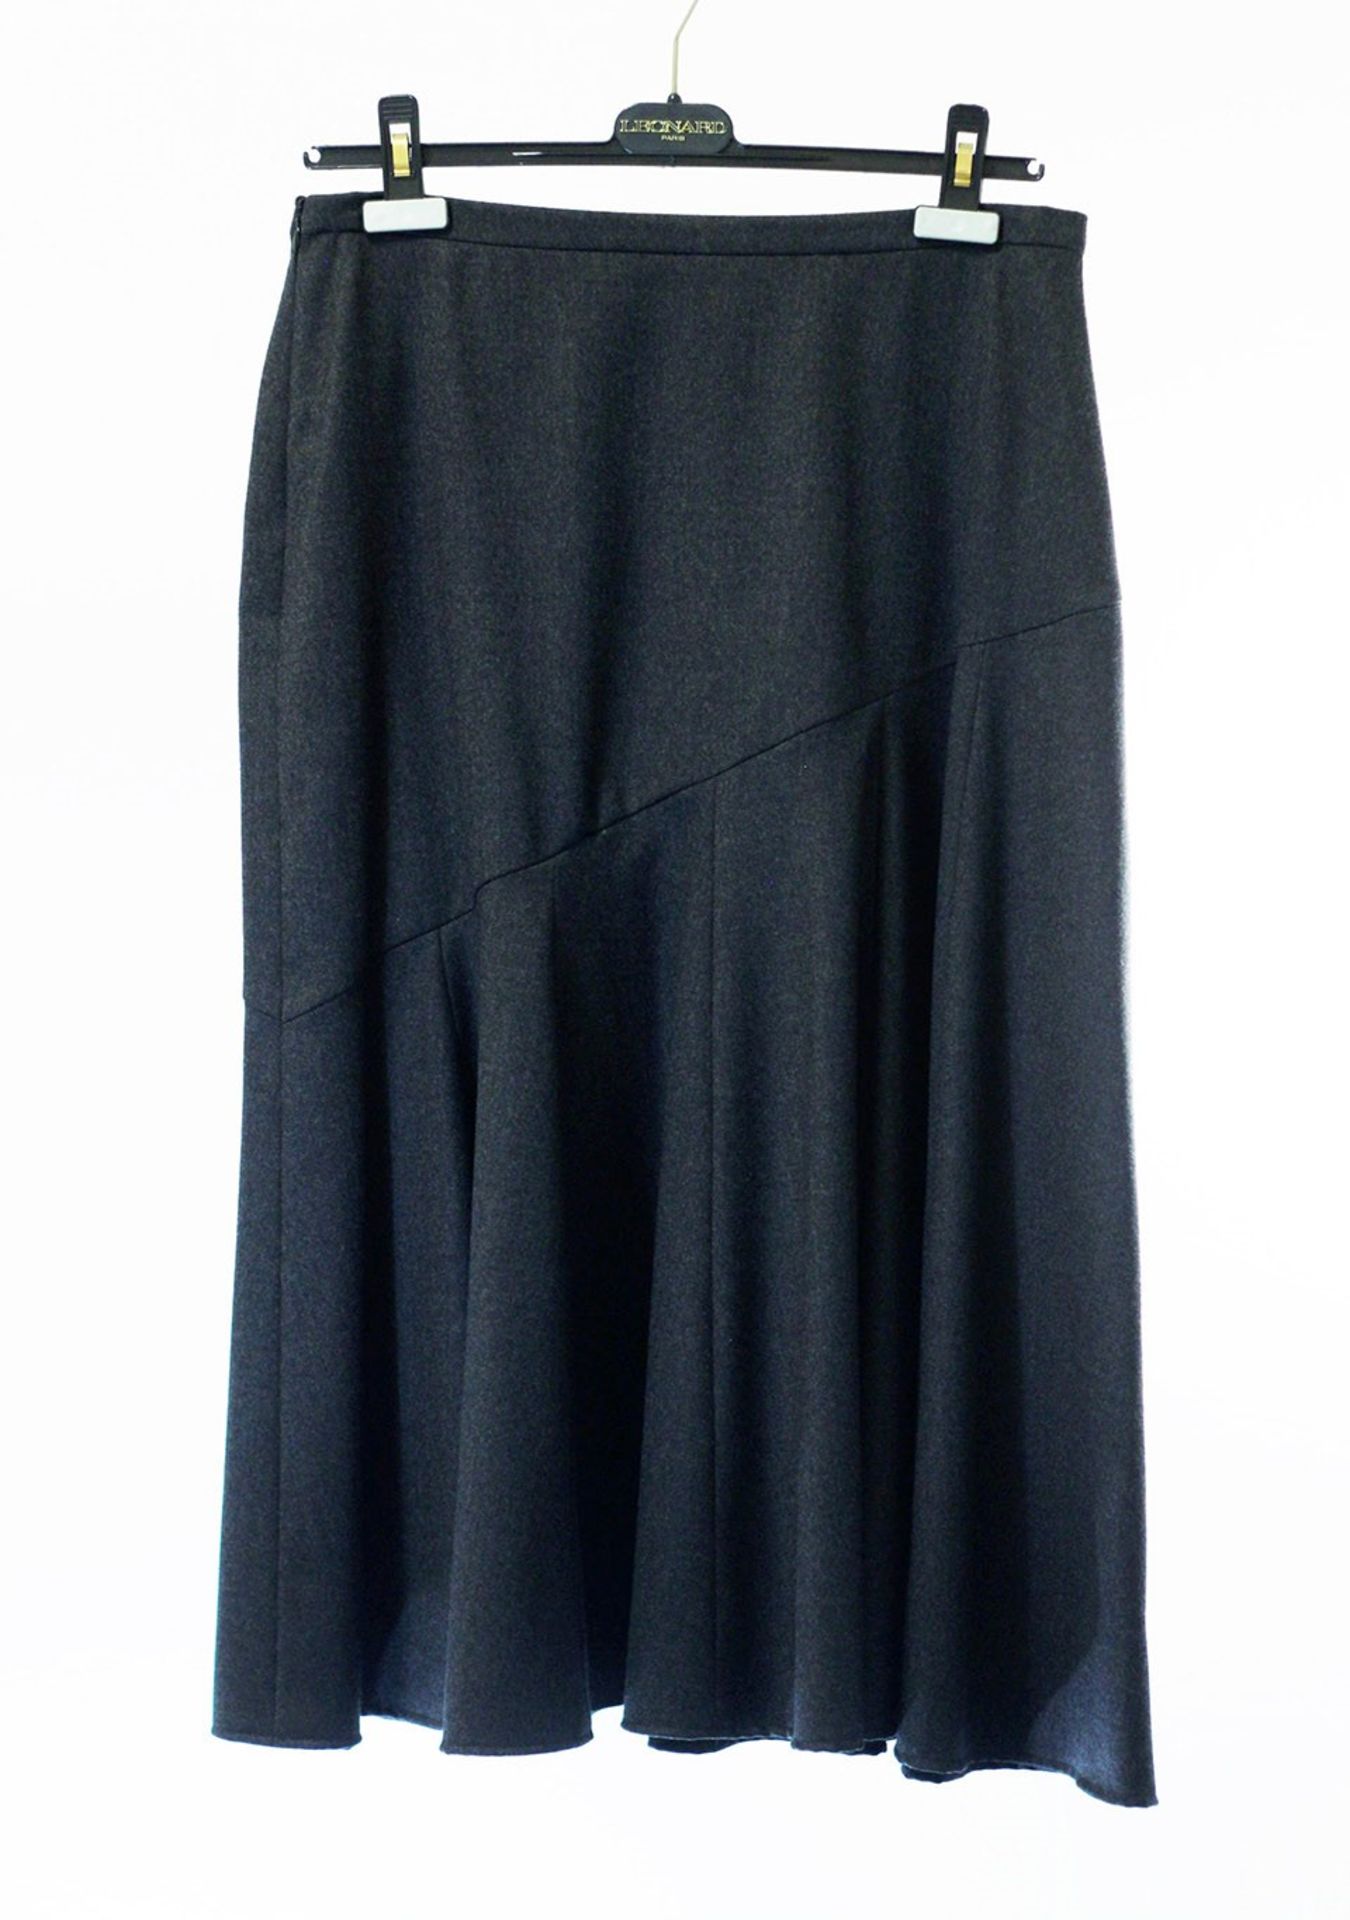 1 x Anne Belin Dark Grey Skirt - Size: 18 - Material: 100% Wool - From a High End Clothing